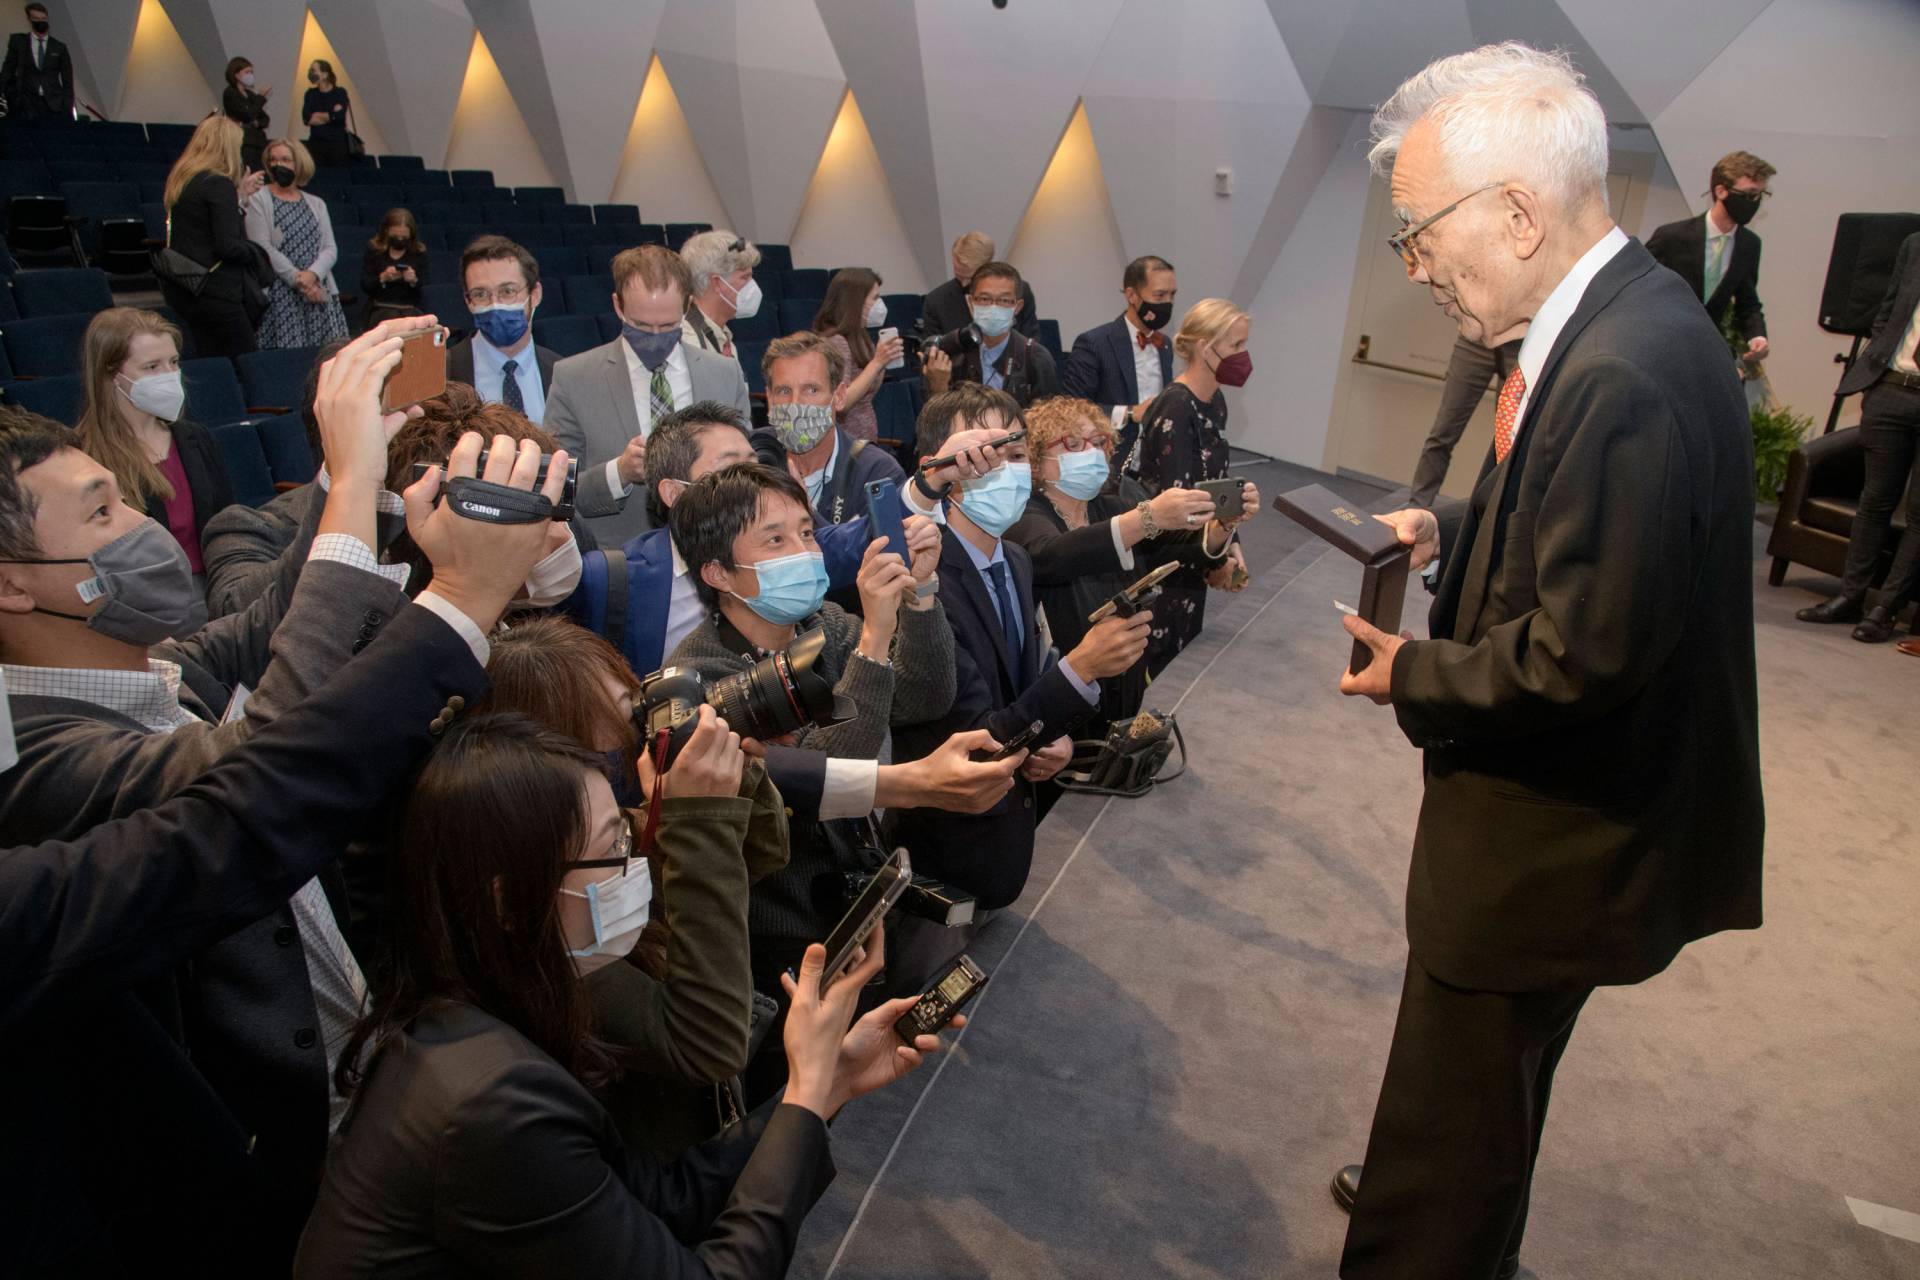 Manabe shows his Nobel medal to a throng of journalists